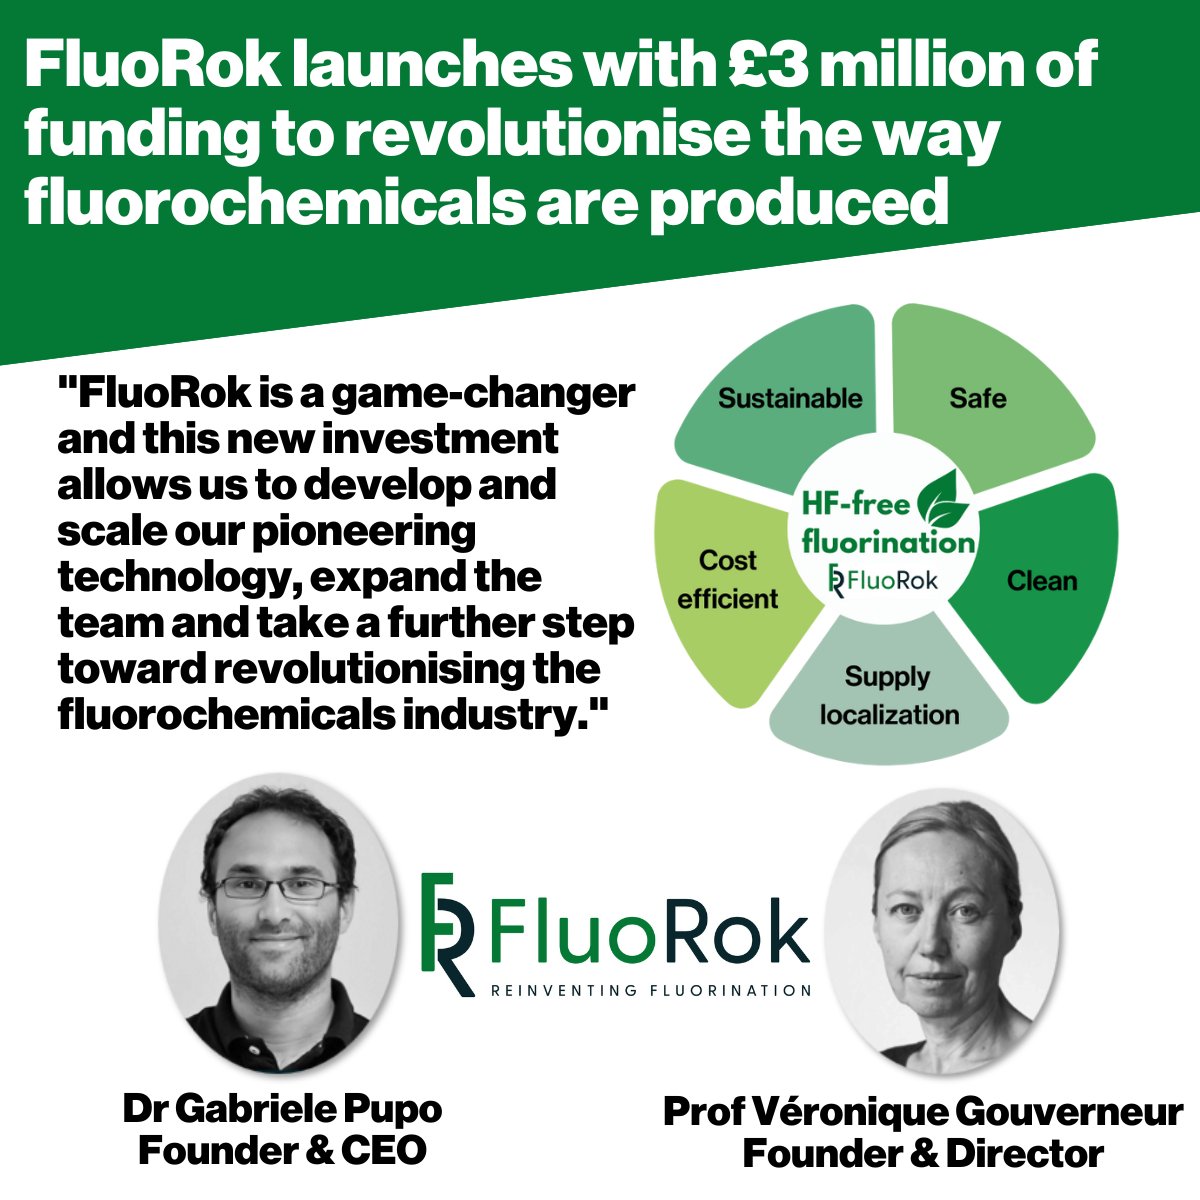 Thrilled to announce £3m seed funding from @OxfordSciEnt. Delighted to join the portfolio of innovators & disruptors tackling the world’s toughest challenges. Together we will lead fluorochemicals manufacturing into the 21st century. Full announcement fluorok.com/wp-content/upl…